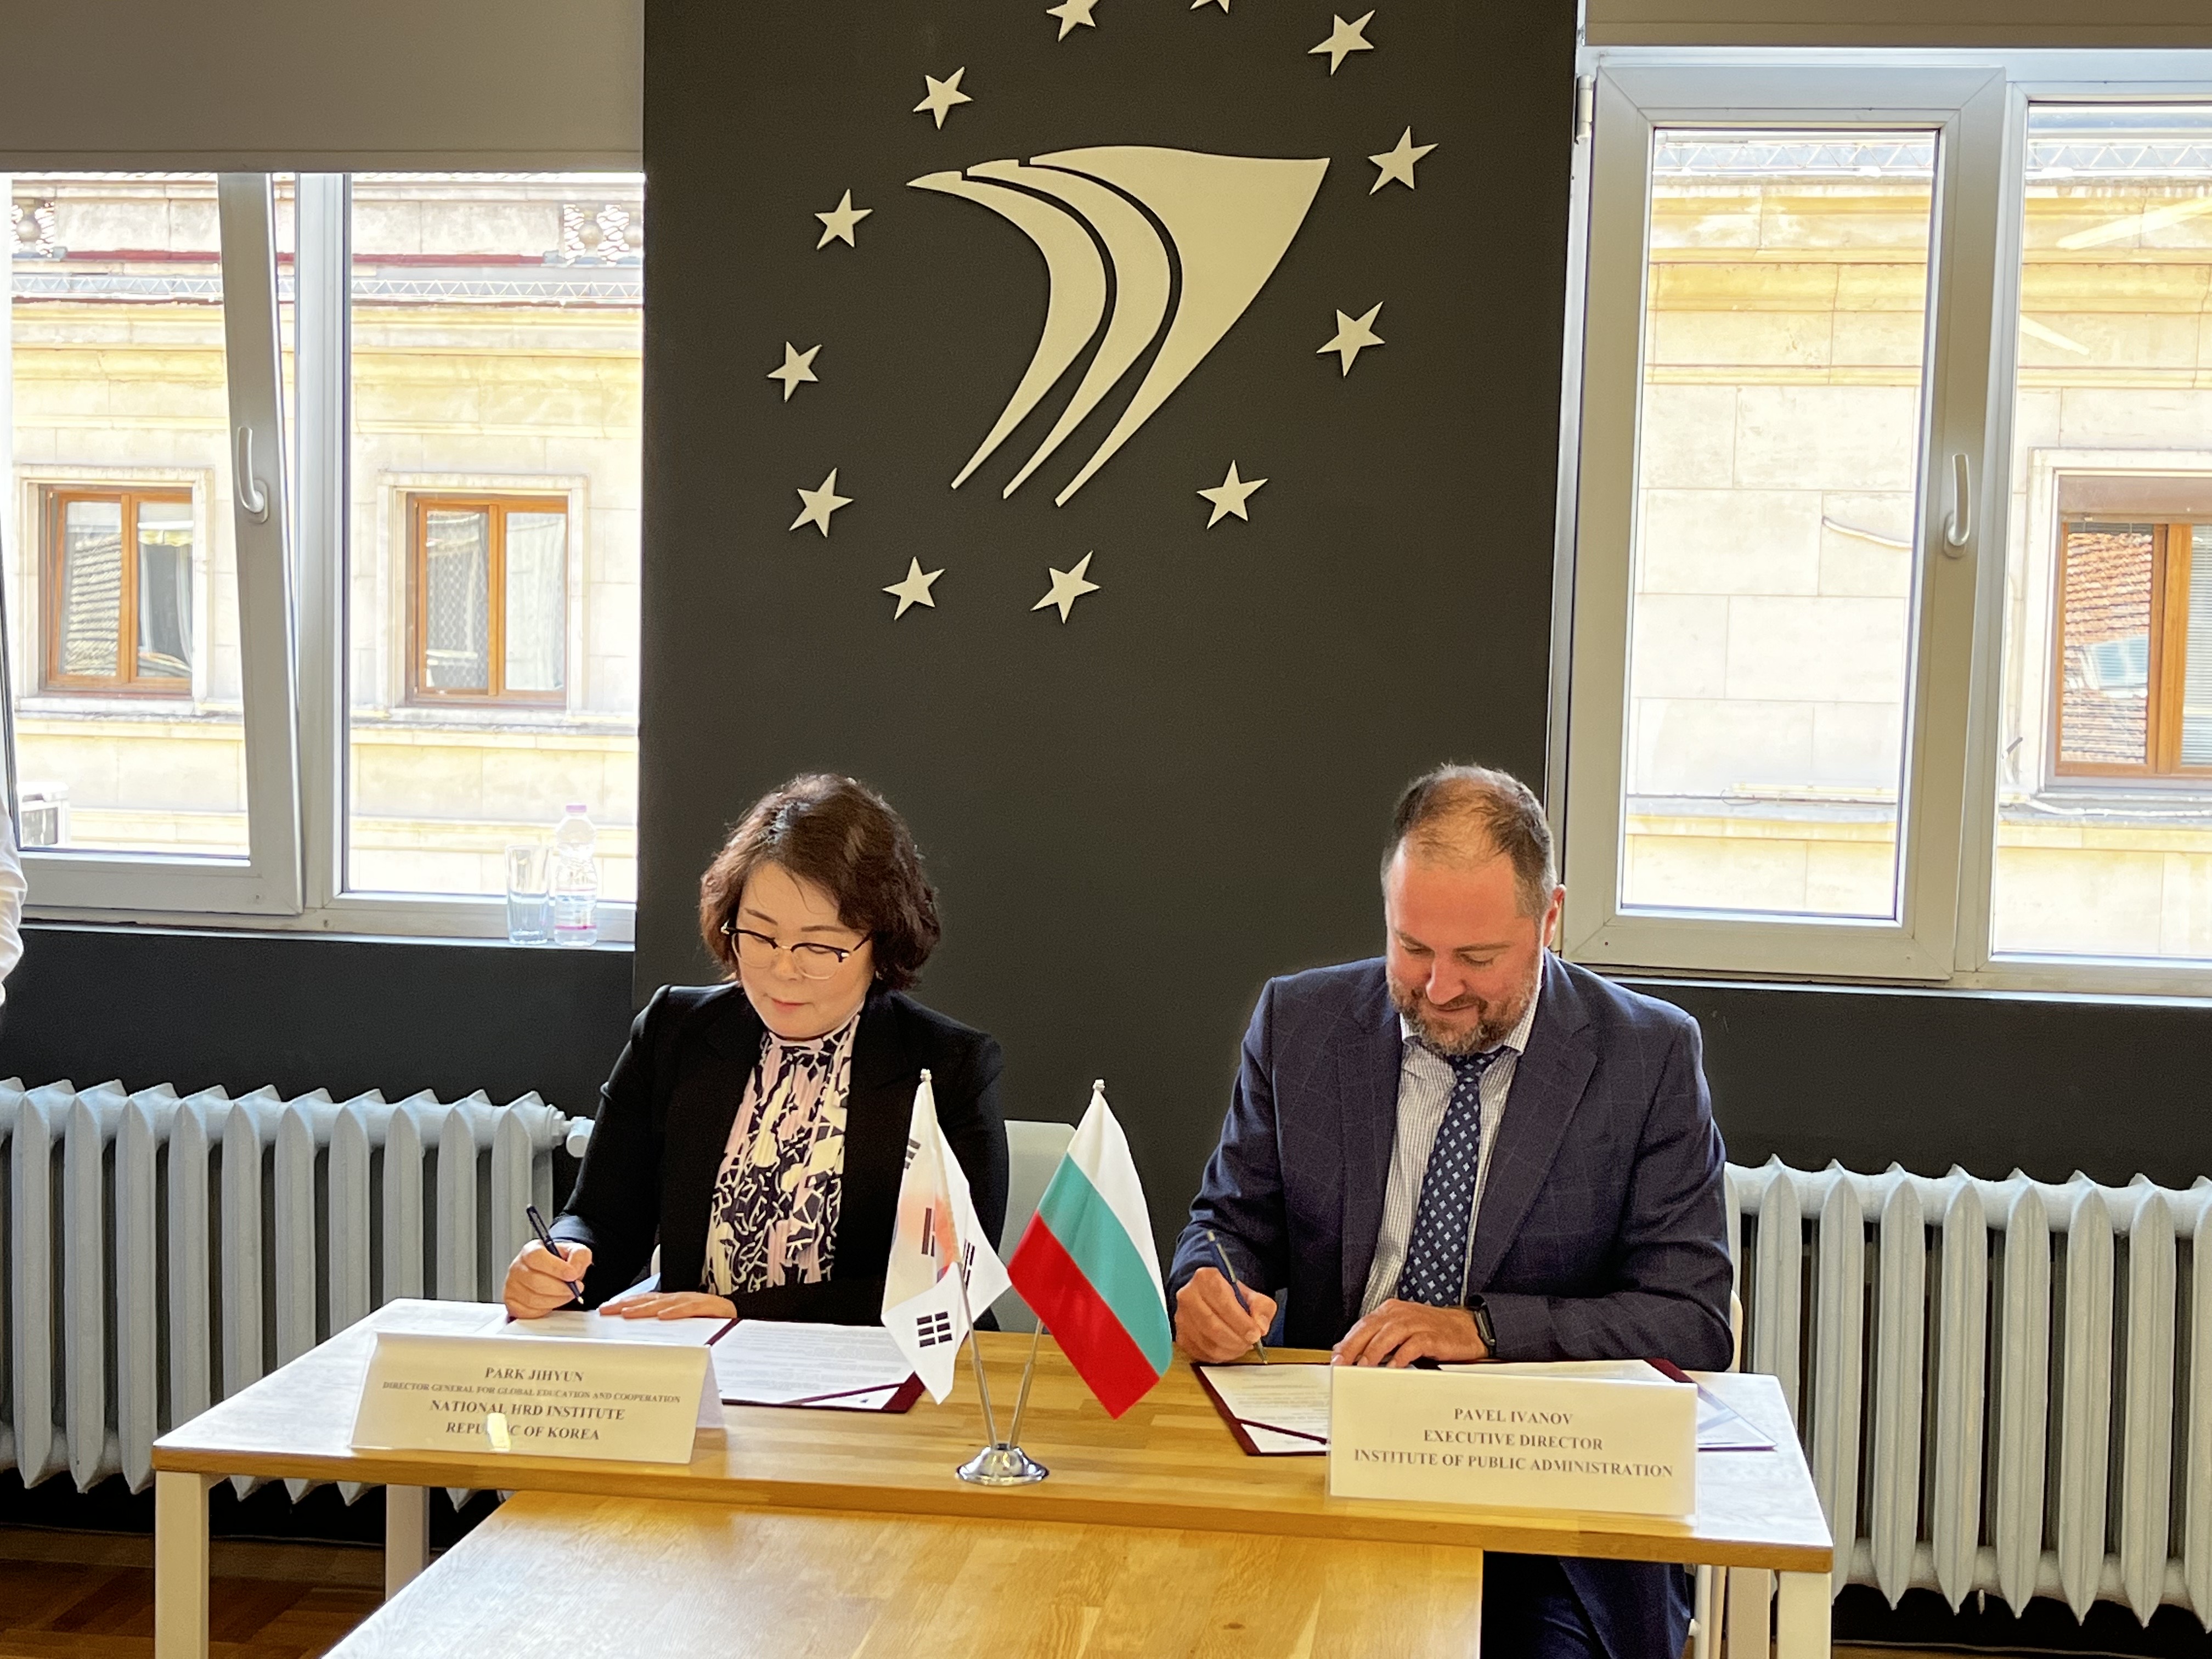 The NHI and the IPA have signed an MOU on cooperation in Public HRD on Tuesday June 1st in Bulgaria.